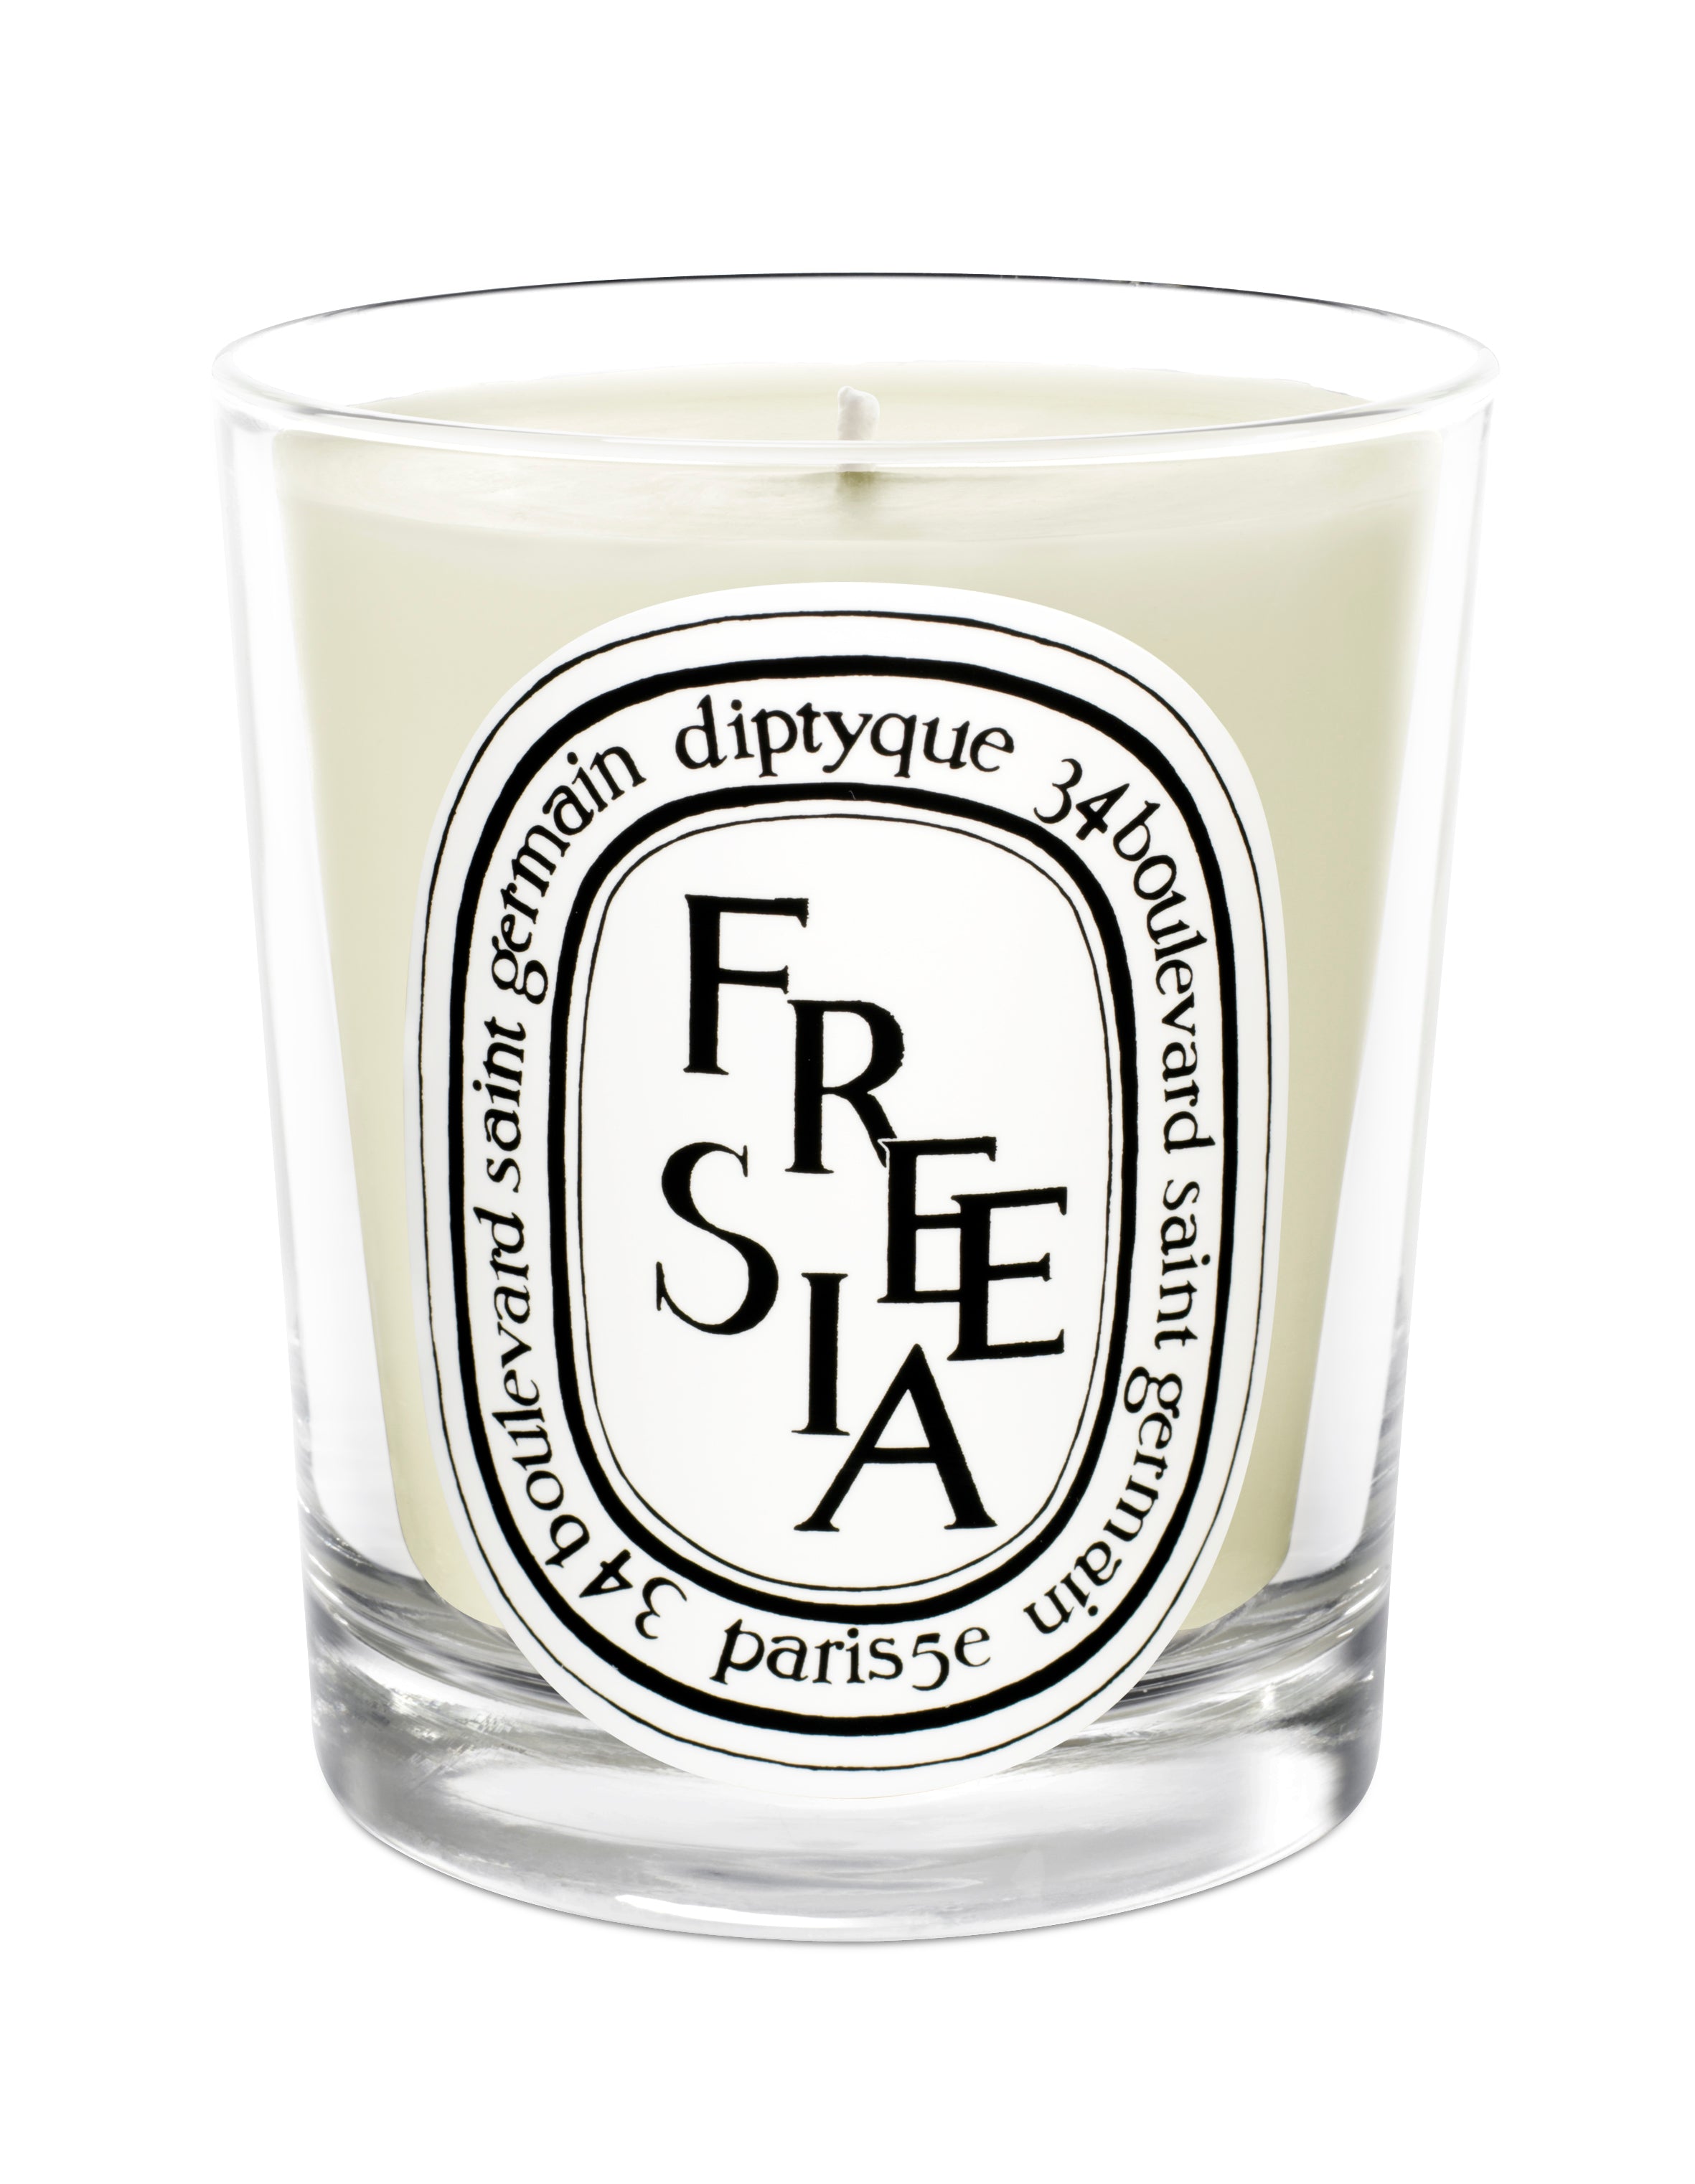 Diptyque Fresia Standard Candle